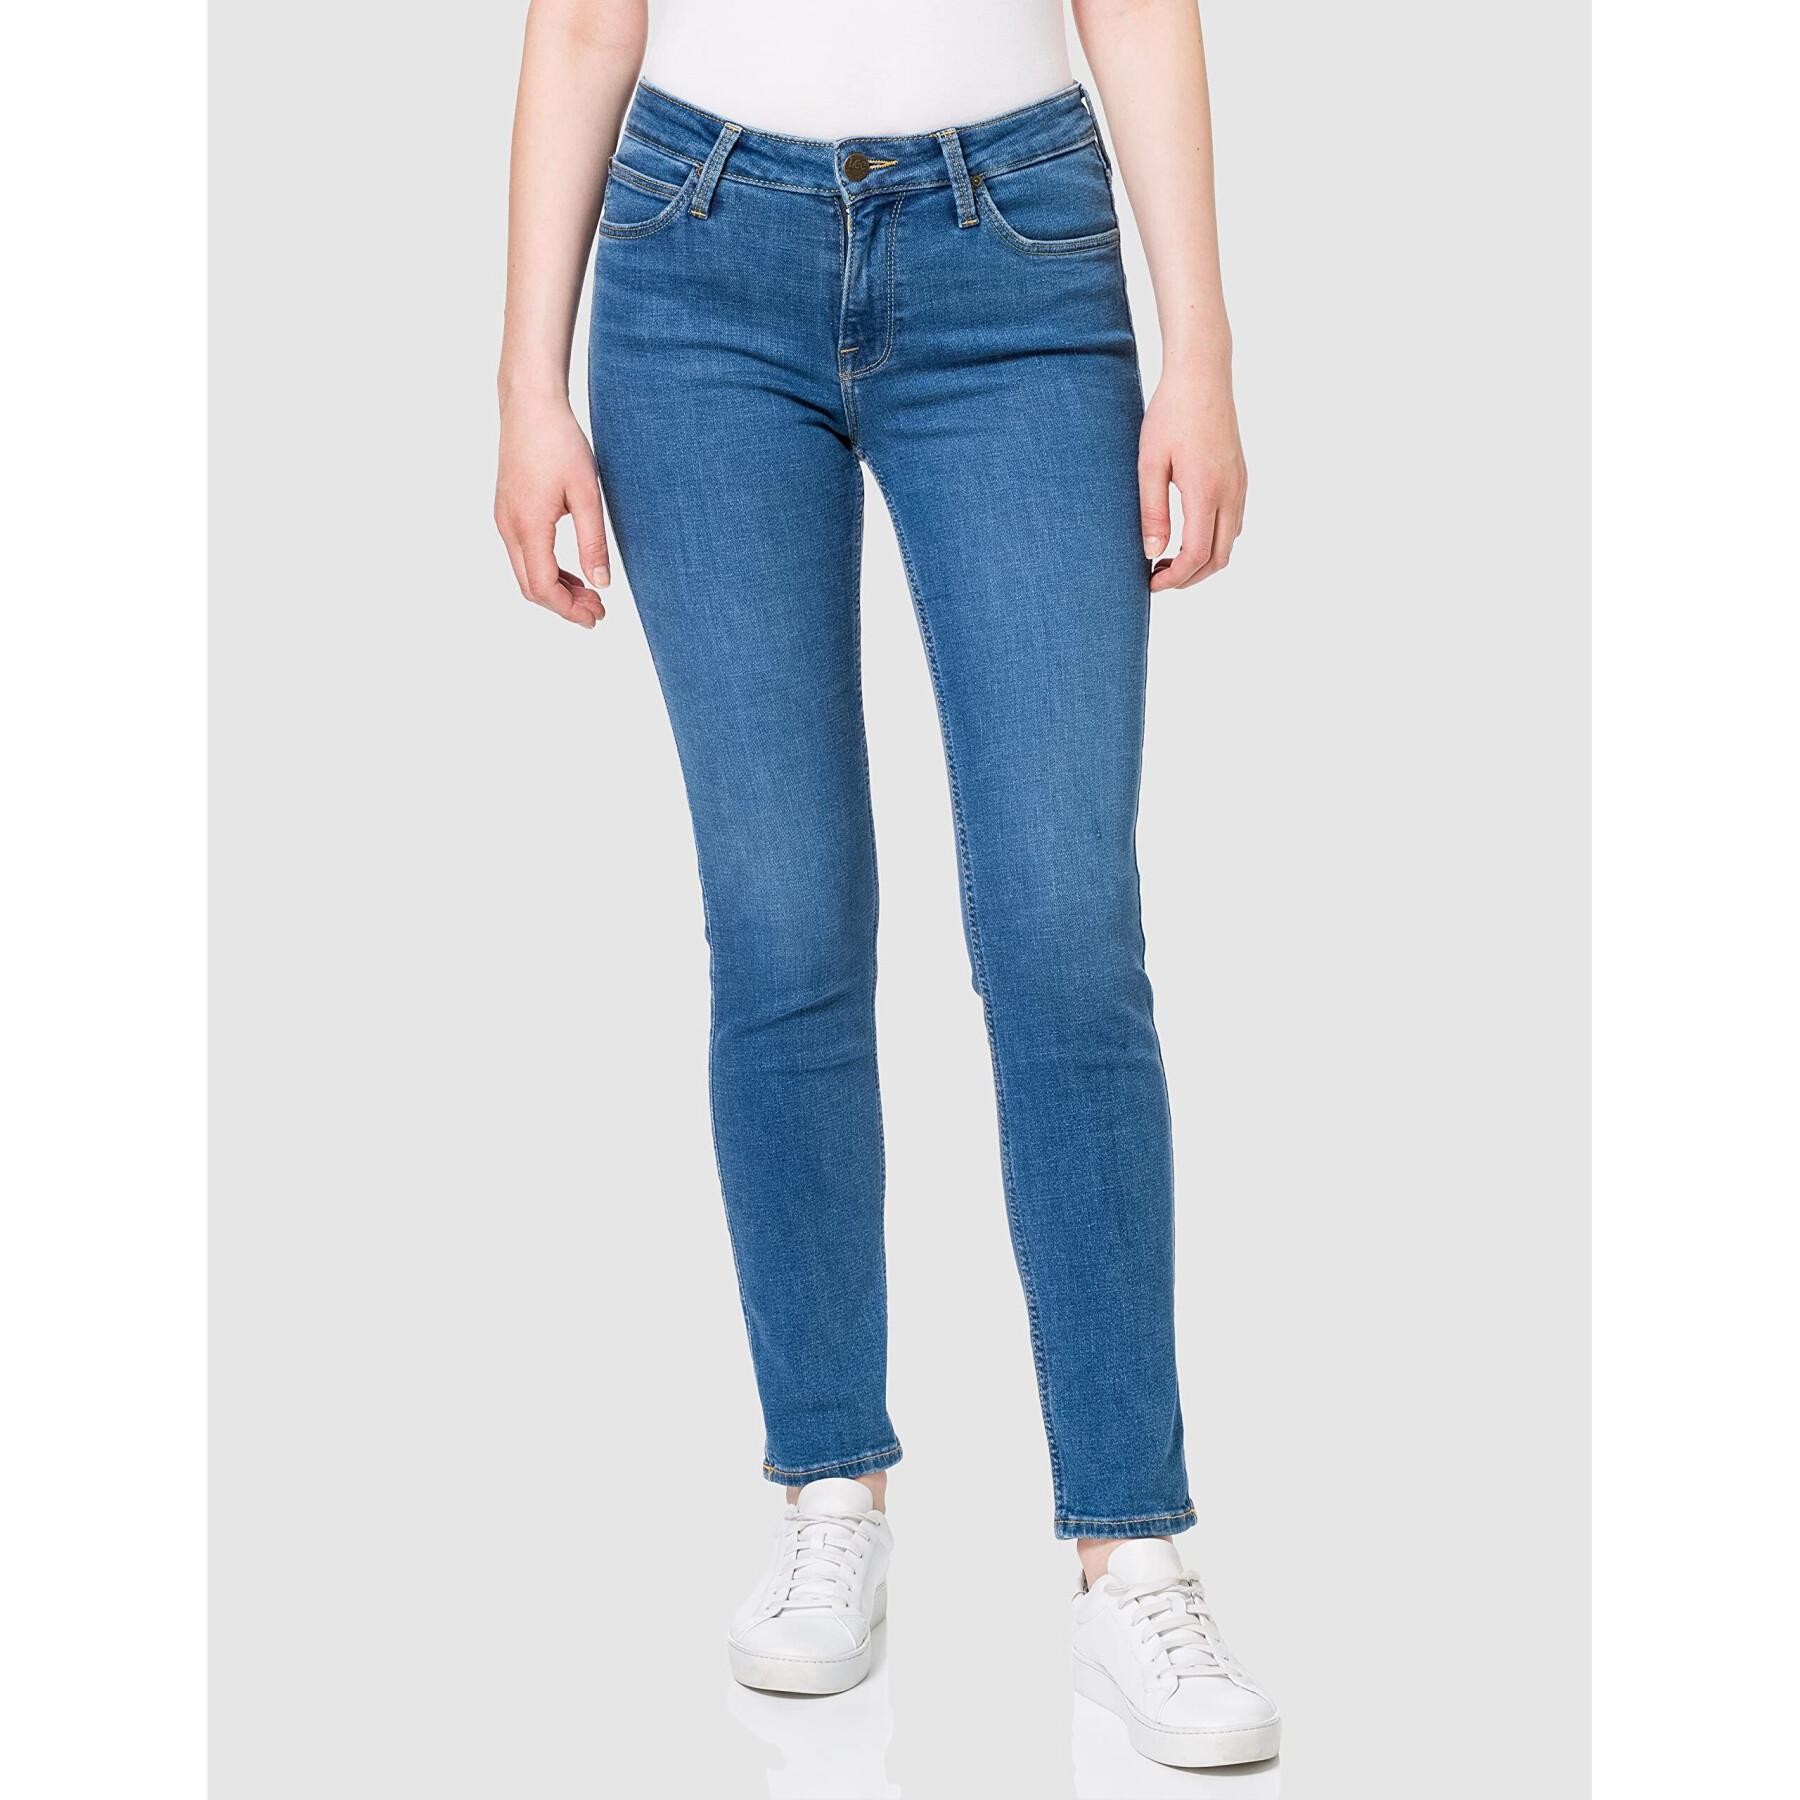 Women's jeans Lee Elly in Mid Madison